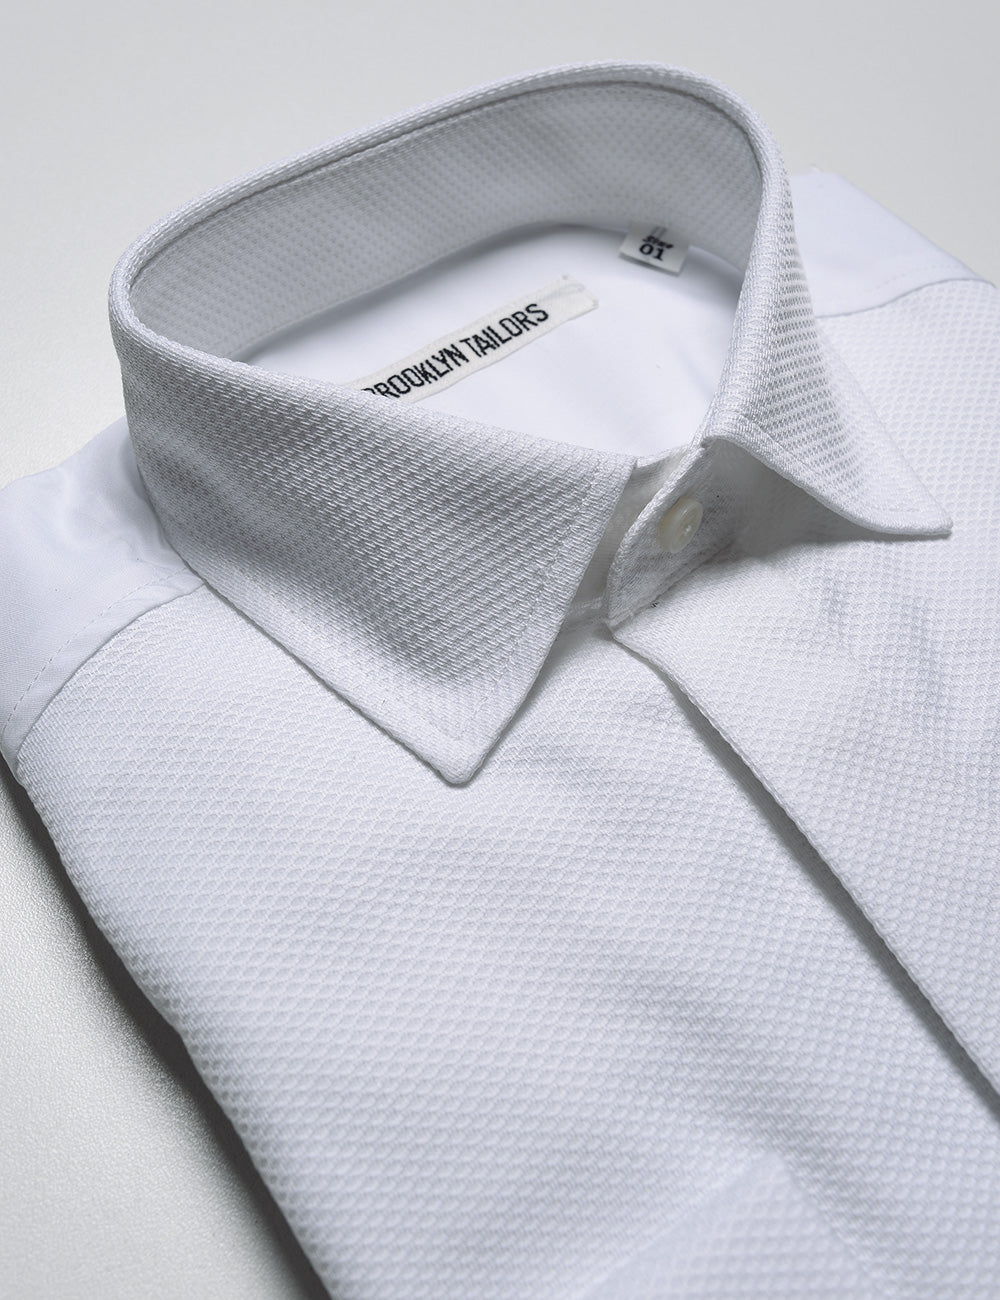 Detail shot of collar and placket on Brooklyn Tailors BKT20 Classic French Cuff Tuxedo Shirt -  Waffle Pique